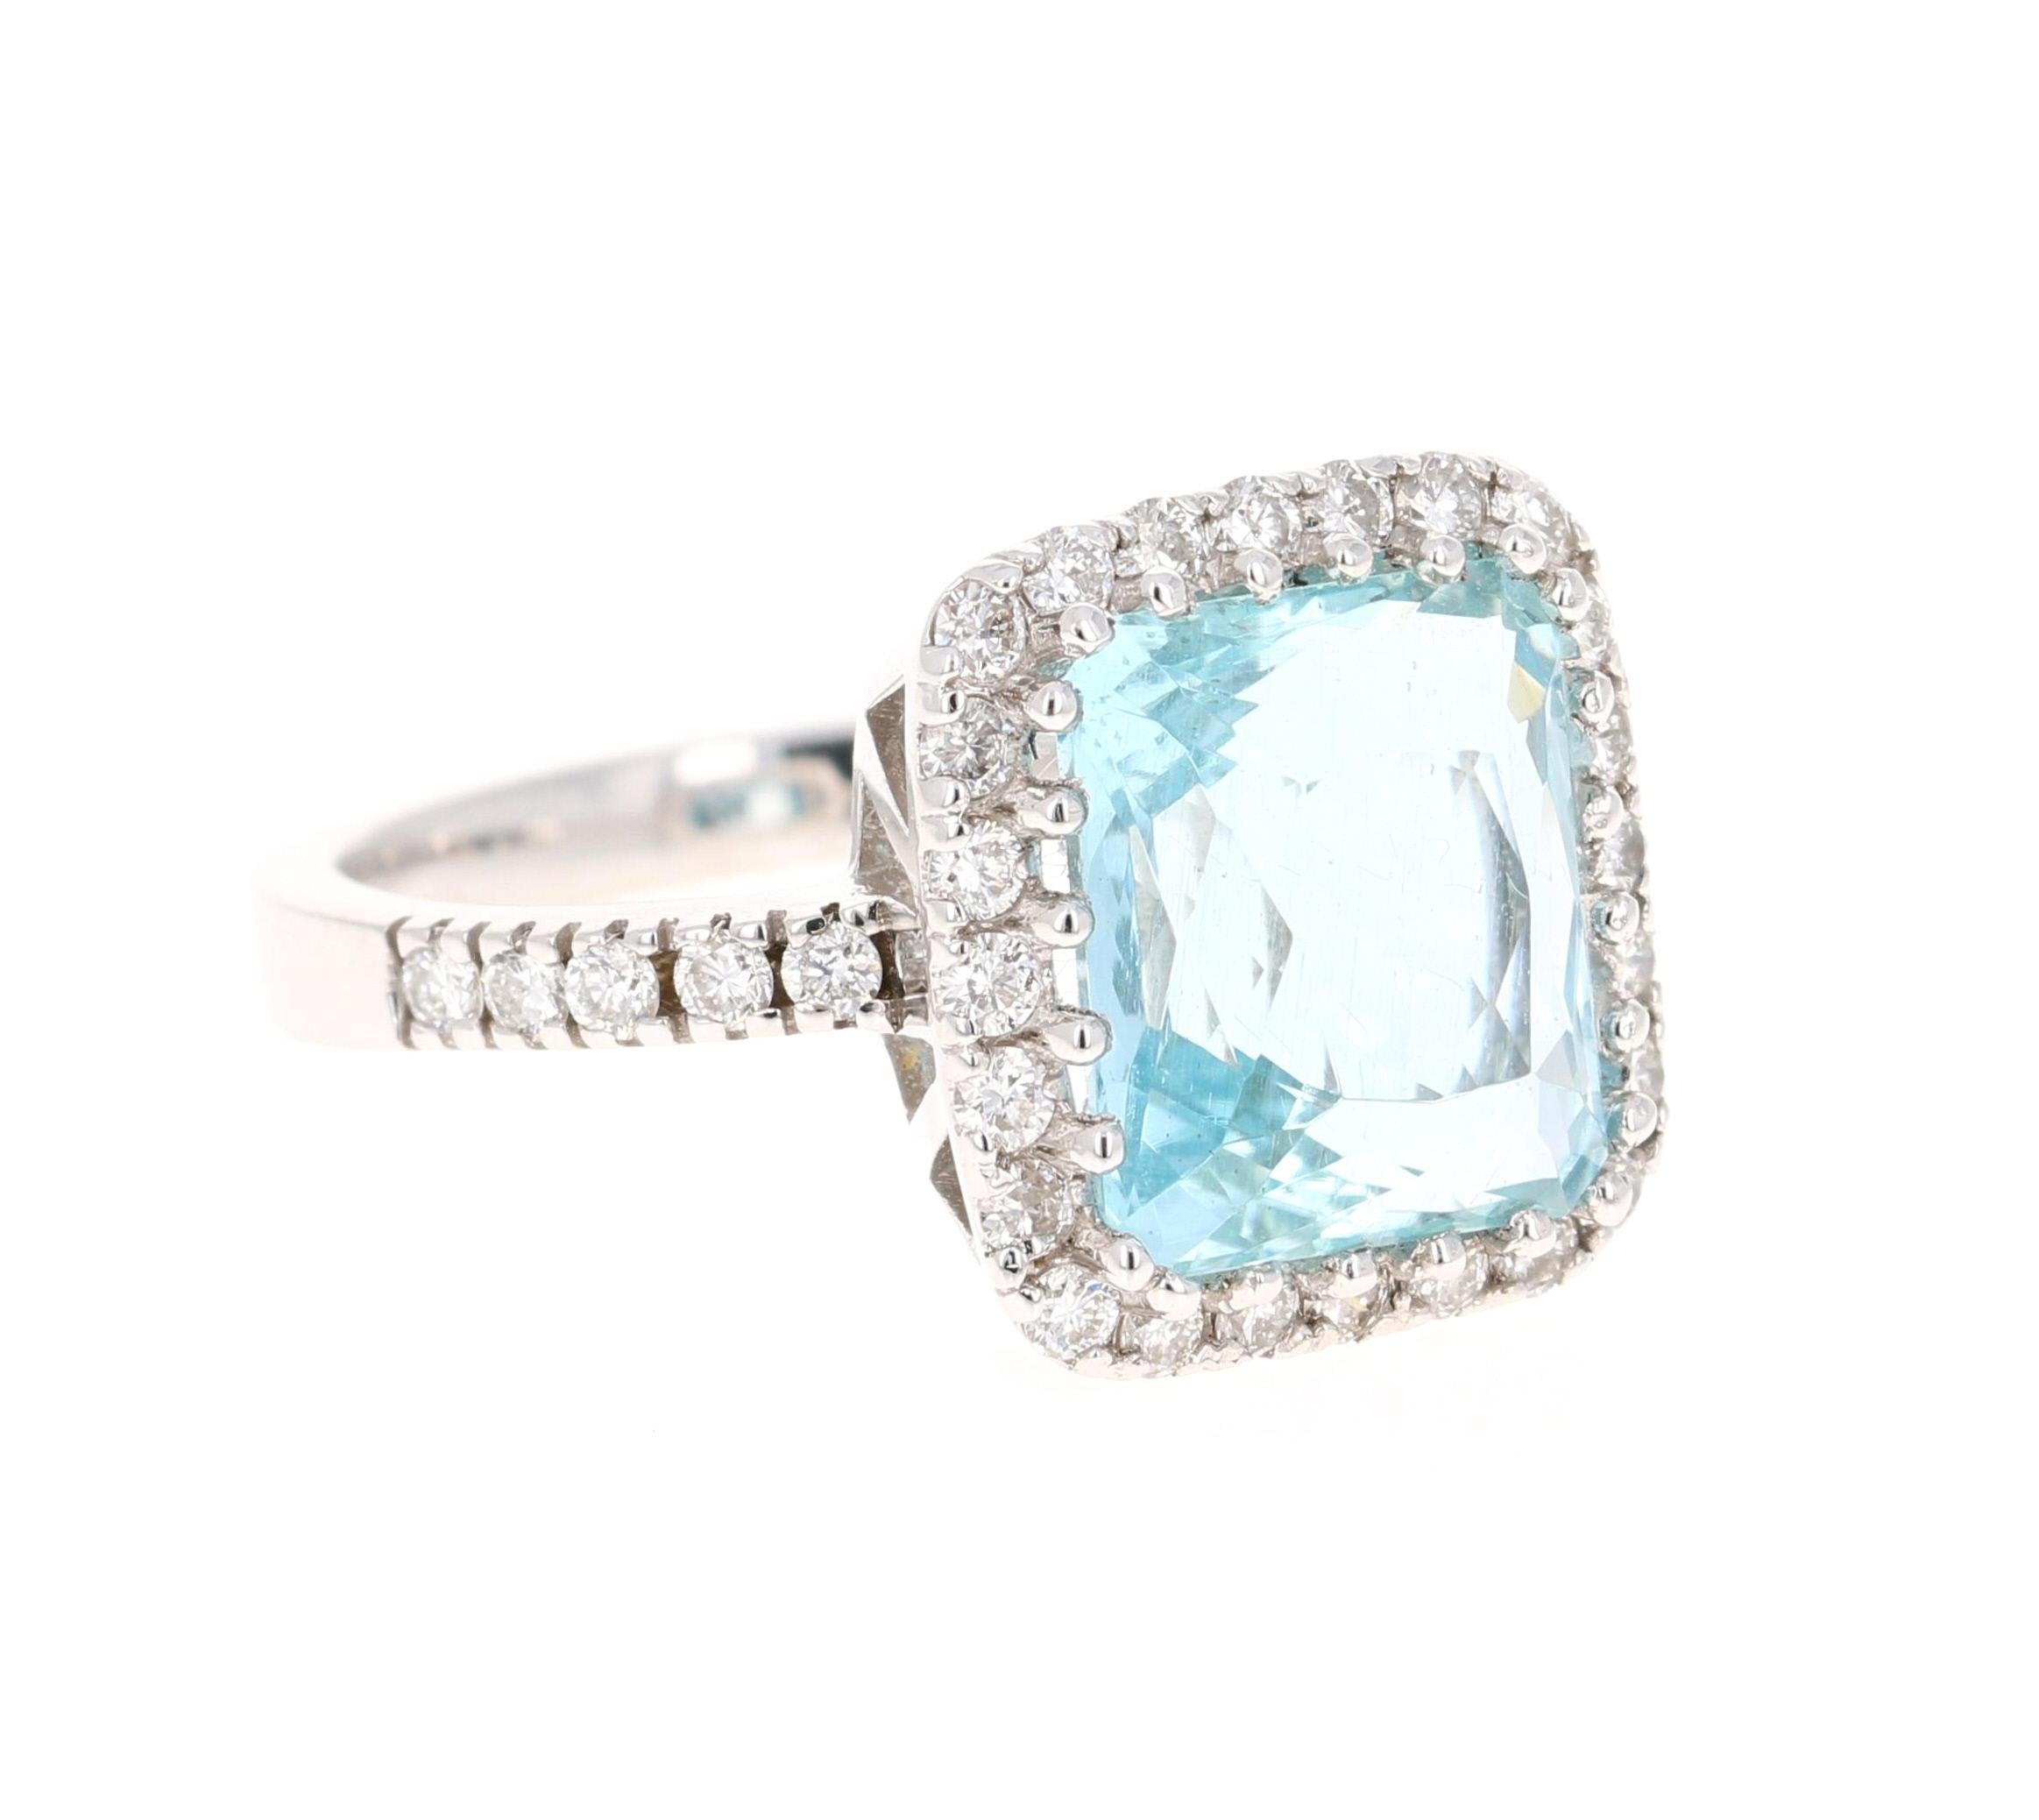 This ring has a 5.98 Carat gorgeous Aquamarine and is surrounded by 34 Round Brilliant Cut Diamonds that weigh 0.74 Carats. The Clarity of the Diamonds is a VS and the Color is F.  The total carat weight of the ring is 6.72 Carats.

The ring is